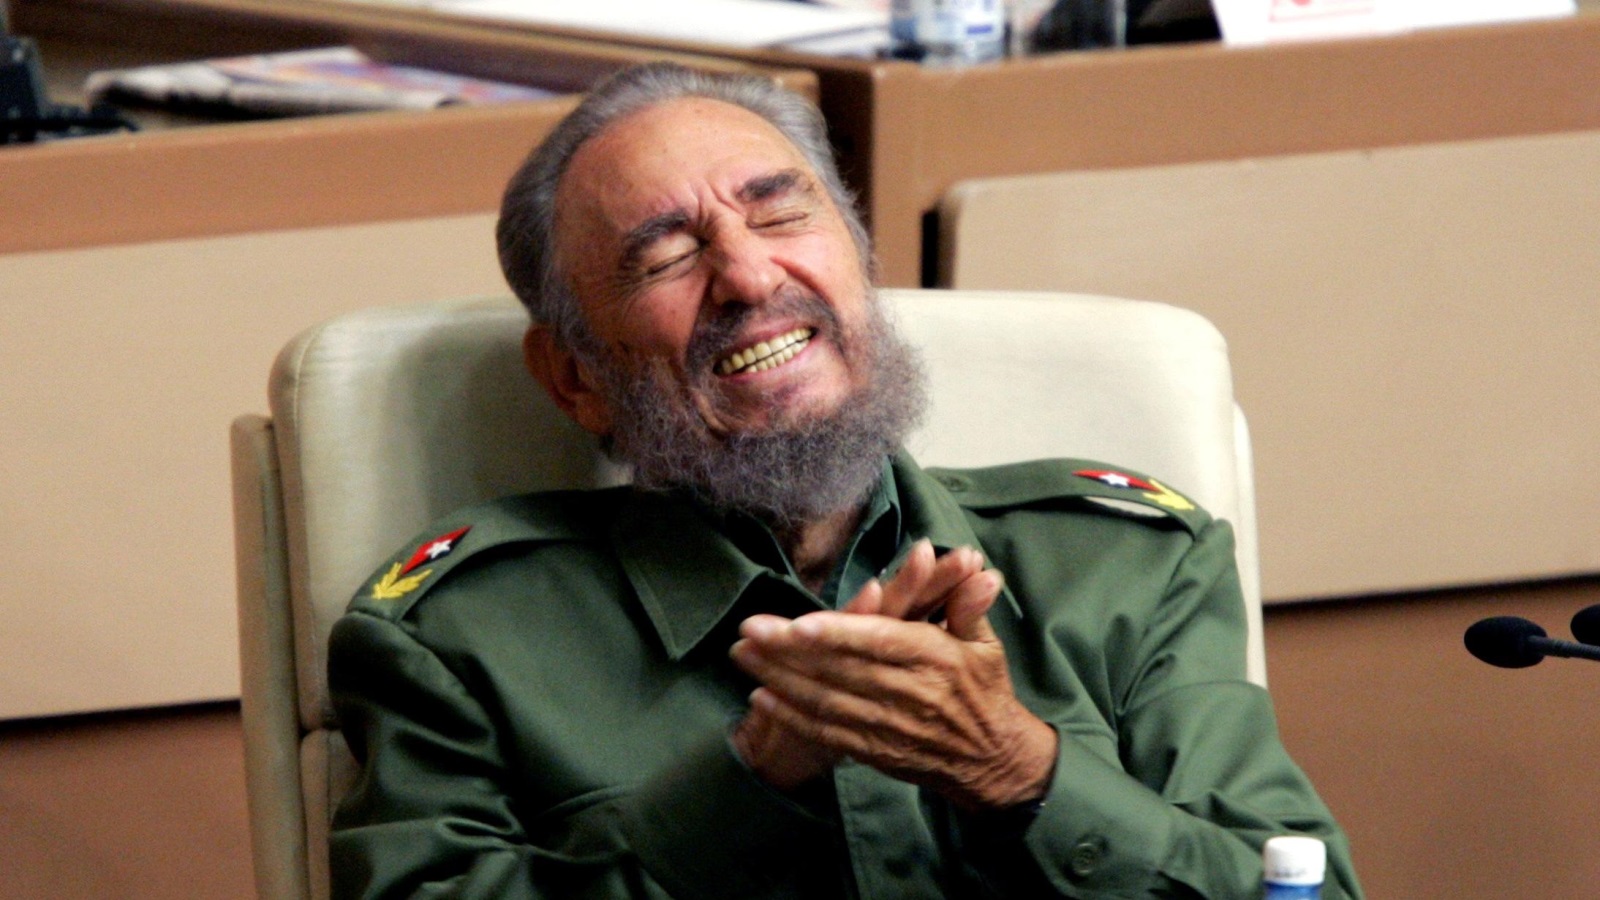 Then Cuban President Fidel Castro laughs during the year-end session of the Cuban parliament in Havana in this December 23, 2005 file photo. REUTERS/Claudia Daut/File Photo